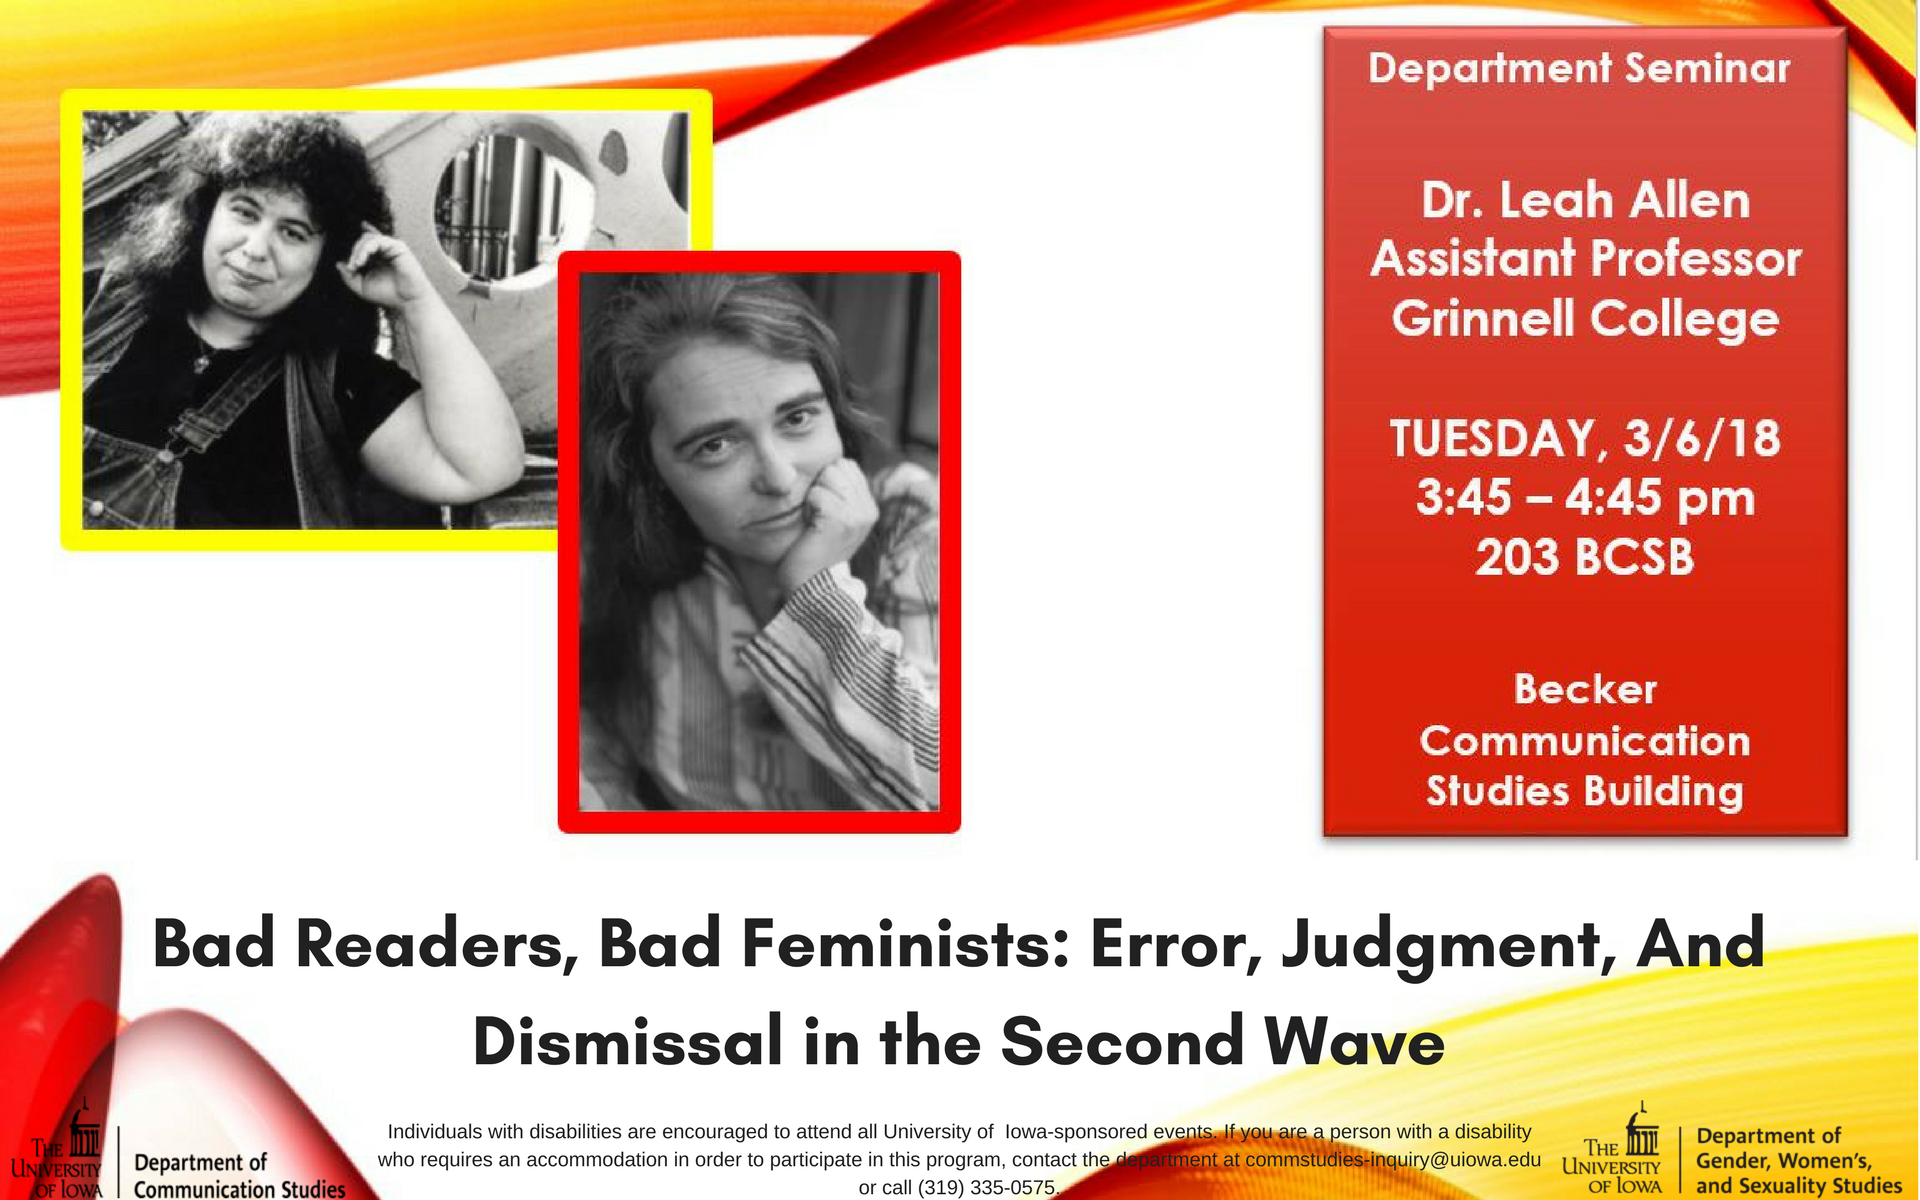 Department Seminar: Dr. Leah Allen, Assistant Professor Grinnell College. Tuesday, 3/6/18 3:45-4:45 PM 203 BCSB Becker Communication Studies Building. "Bad Readers, Bad Feminists: Error, Judgment, And Dismissal in the Second Wave" Individuals with disabilities are encouraged to attend all University of  Iowa-sponsored events. If you are a person with a disability who requires an accommodation in order to participate in this program, contact the department at commstudies-inquiry@uiowa.edu or call (319) 335-0575.